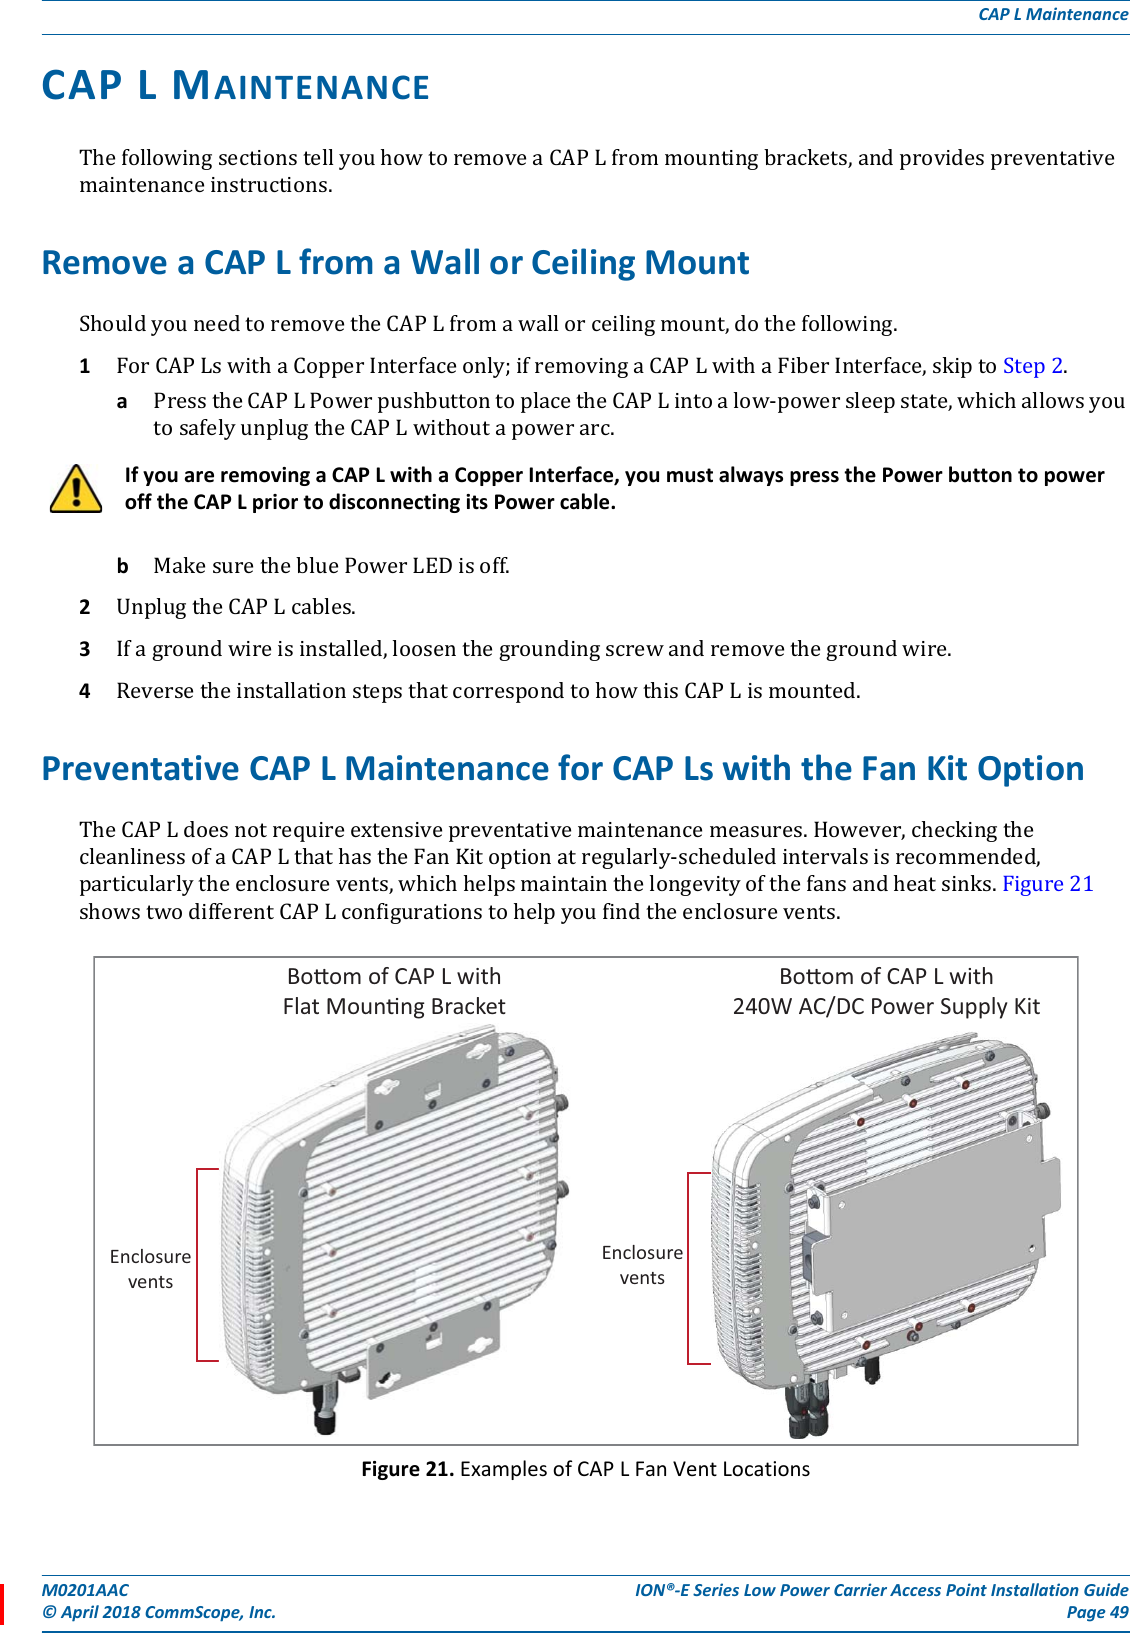 M0201AAC ION®-E Series Low Power Carrier Access Point Installation Guide© April 2018 CommScope, Inc. Page 49CAP L MaintenanceCAP L MAINTENANCE ThefollowingsectionstellyouhowtoremoveaCAPLfrommountingbrackets,andprovidespreventativemaintenanceinstructions.Remove a CAP L from a Wall or Ceiling MountShouldyouneedtoremovetheCAPLfromawallorceilingmount,dothefollowing.1ForCAPLswithaCopperInterfaceonly;ifremovingaCAPLwithaFiberInterface,skiptoStep2.aPresstheCAPLPowerpushbuttontoplacetheCAPLintoalow-powersleepstate,whichallowsyoutosafelyunplugtheCAPLwithoutapowerarc.bMakesurethebluePowerLEDisoff.2UnplugtheCAPLcables.3Ifagroundwireisinstalled,loosenthegroundingscrewandremovethegroundwire.4ReversetheinstallationstepsthatcorrespondtohowthisCAPLismounted.Preventative CAP L Maintenance for CAP Ls with the Fan Kit OptionTheCAPLdoesnotrequireextensivepreventativemaintenancemeasures.However,checkingthecleanlinessofaCAPLthathastheFanKitoptionatregularly-scheduledintervalsisrecommended,particularlytheenclosurevents,whichhelpsmaintainthelongevityofthefansandheatsinks.Figure21showstwodifferentCAPLconfigurationstohelpyoufindtheenclosurevents.Figure 21. Examples of CAP L Fan Vent LocationsIf you are removing a CAP L with a Copper Interface, you must always press the Power button to power off the CAP L prior to disconnecting its Power cable.EnclosureventsBoom of CAP L with240W AC/DC Power Supply KitBoom of CAP L withFlat Mounng BracketEnclosurevents